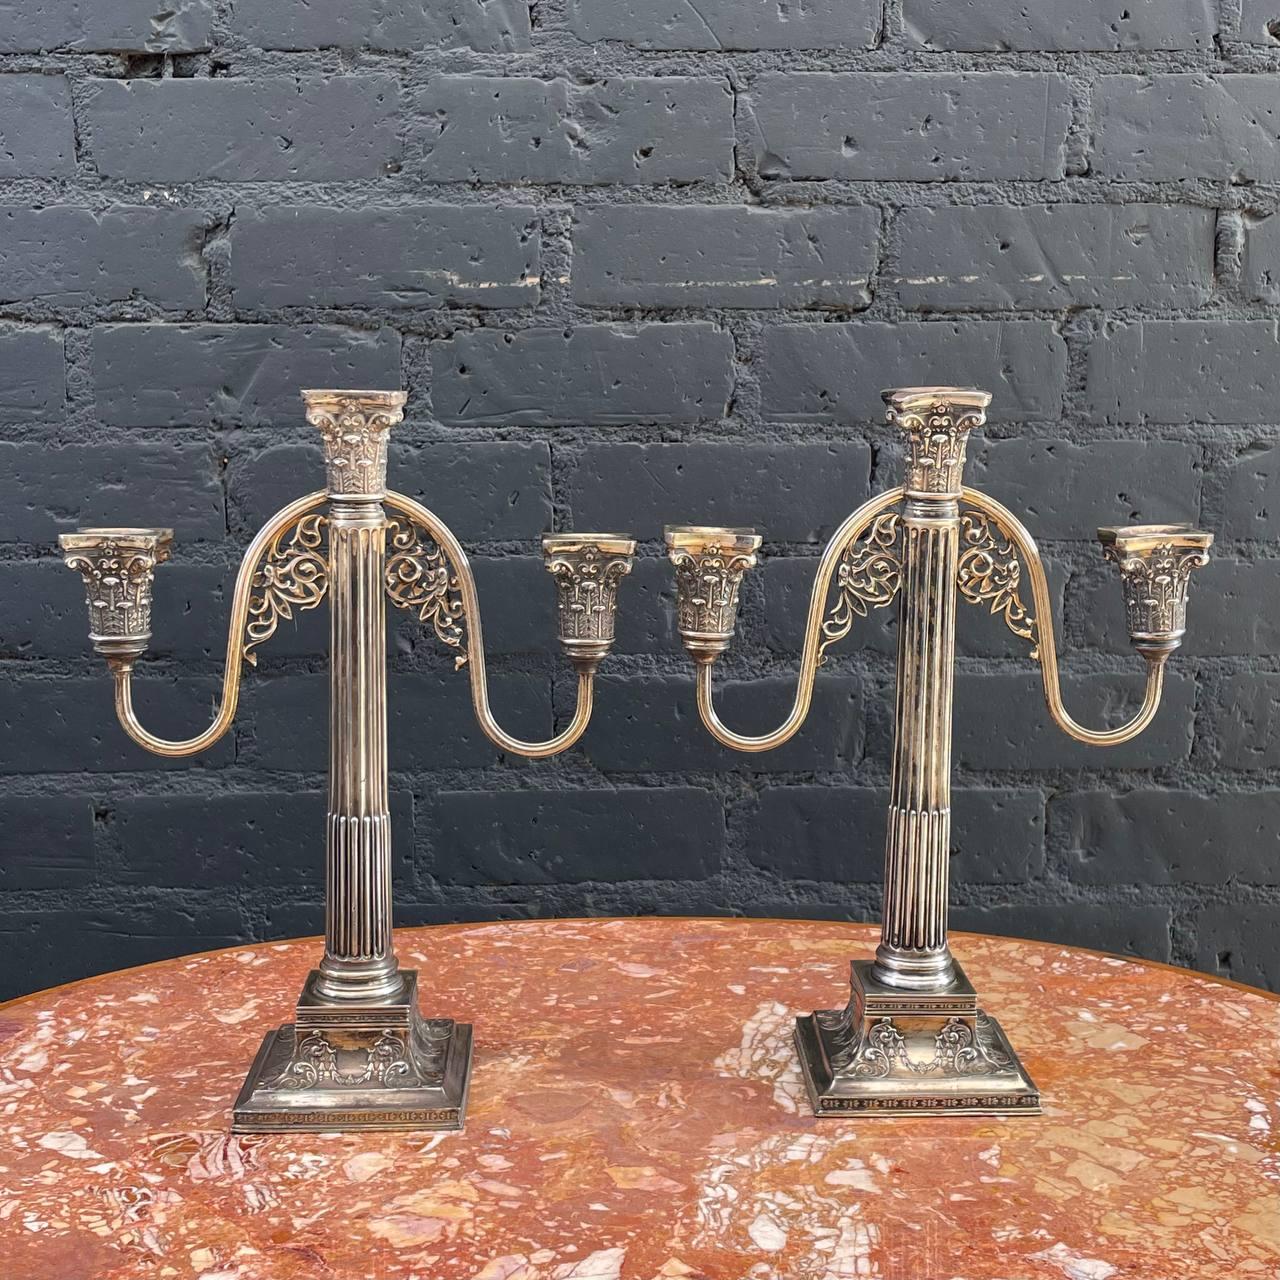 Pair of Antique Silver Plated Candle Holders

Country: Italy
Materials: Silver Plated
Condition: Original Condition
Style: Antique
Year: 1940s

$895 pair 

Dimensions 
14.50”H x 11.50”W x 4.50”D.